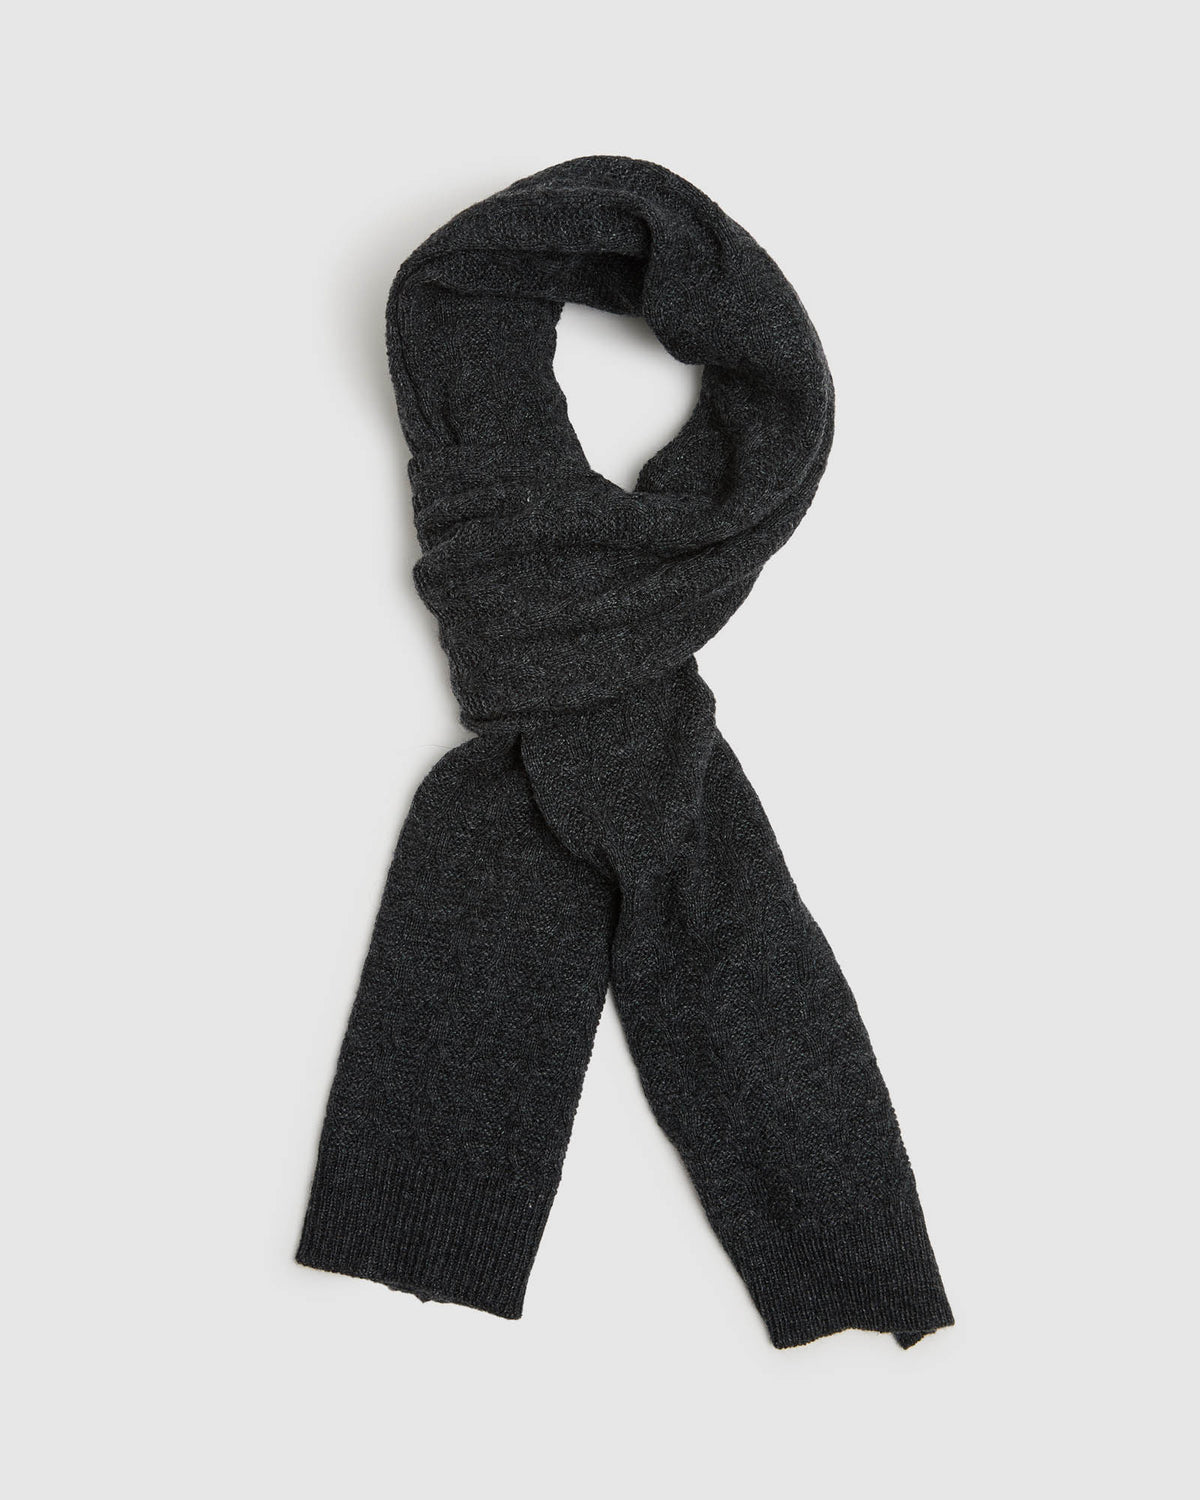 ERIC KNIT SCARF MENS ACCESSORIES